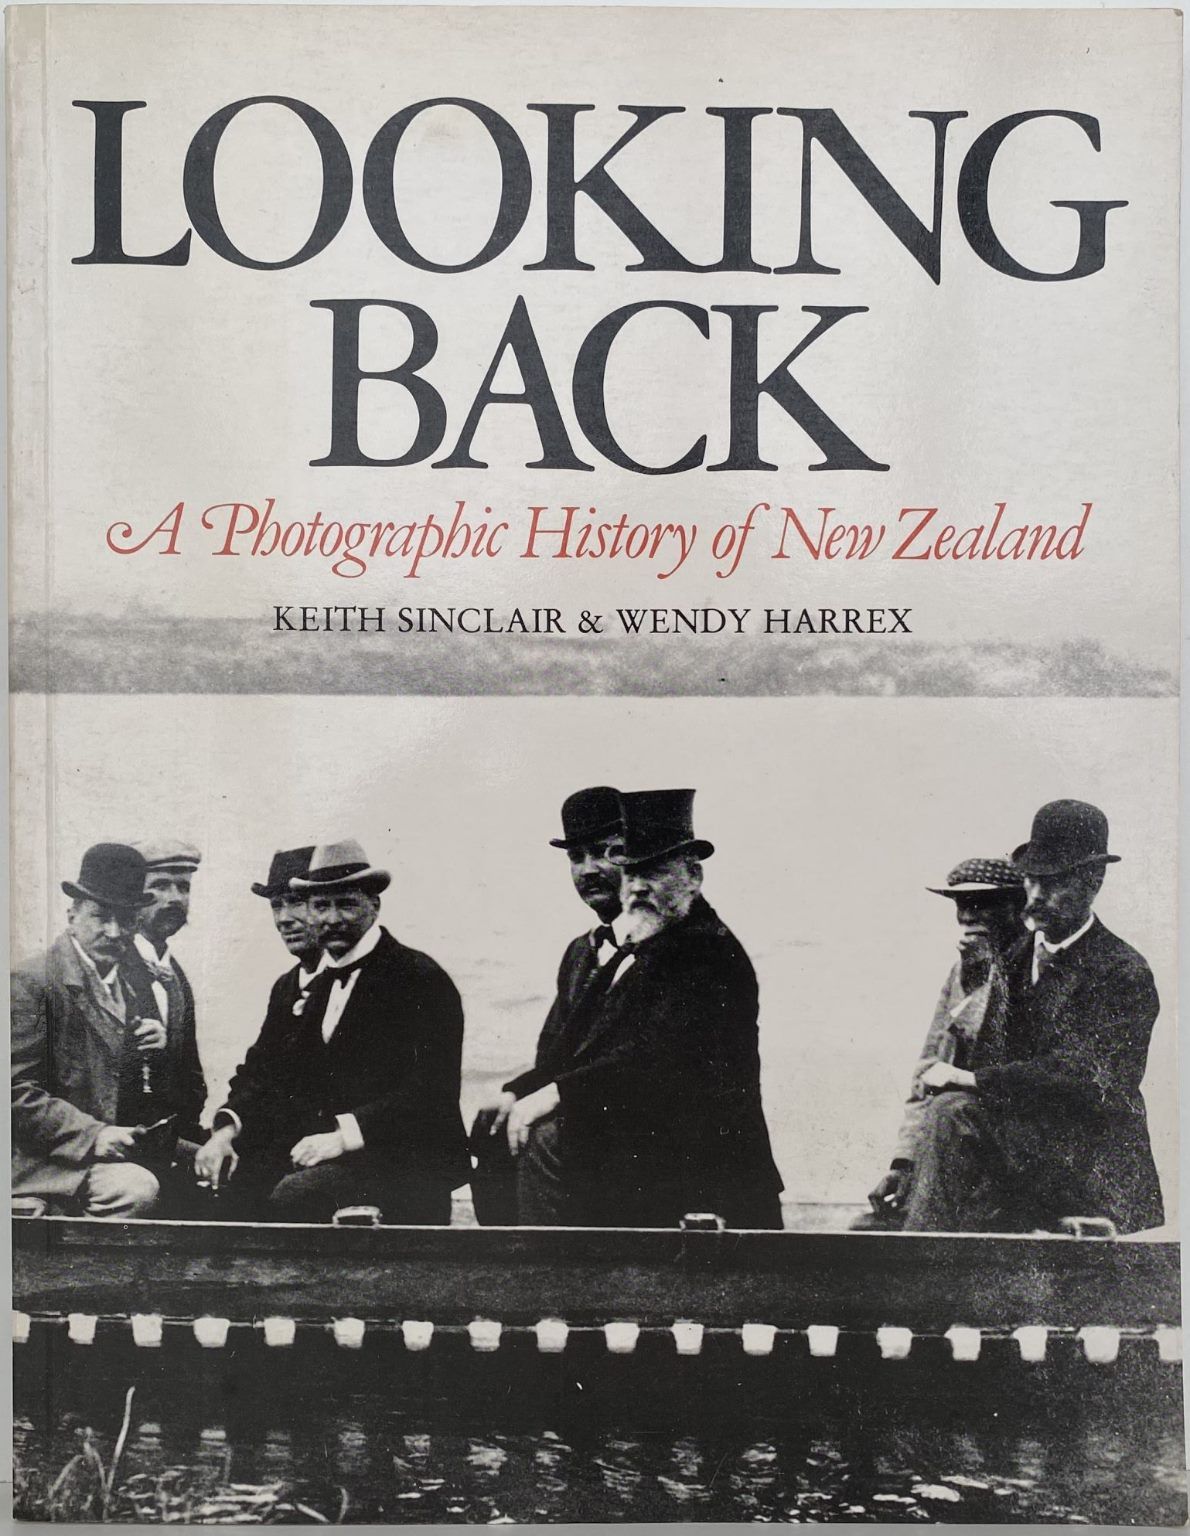 LOOKING BACK: A Photographic History of New Zealand